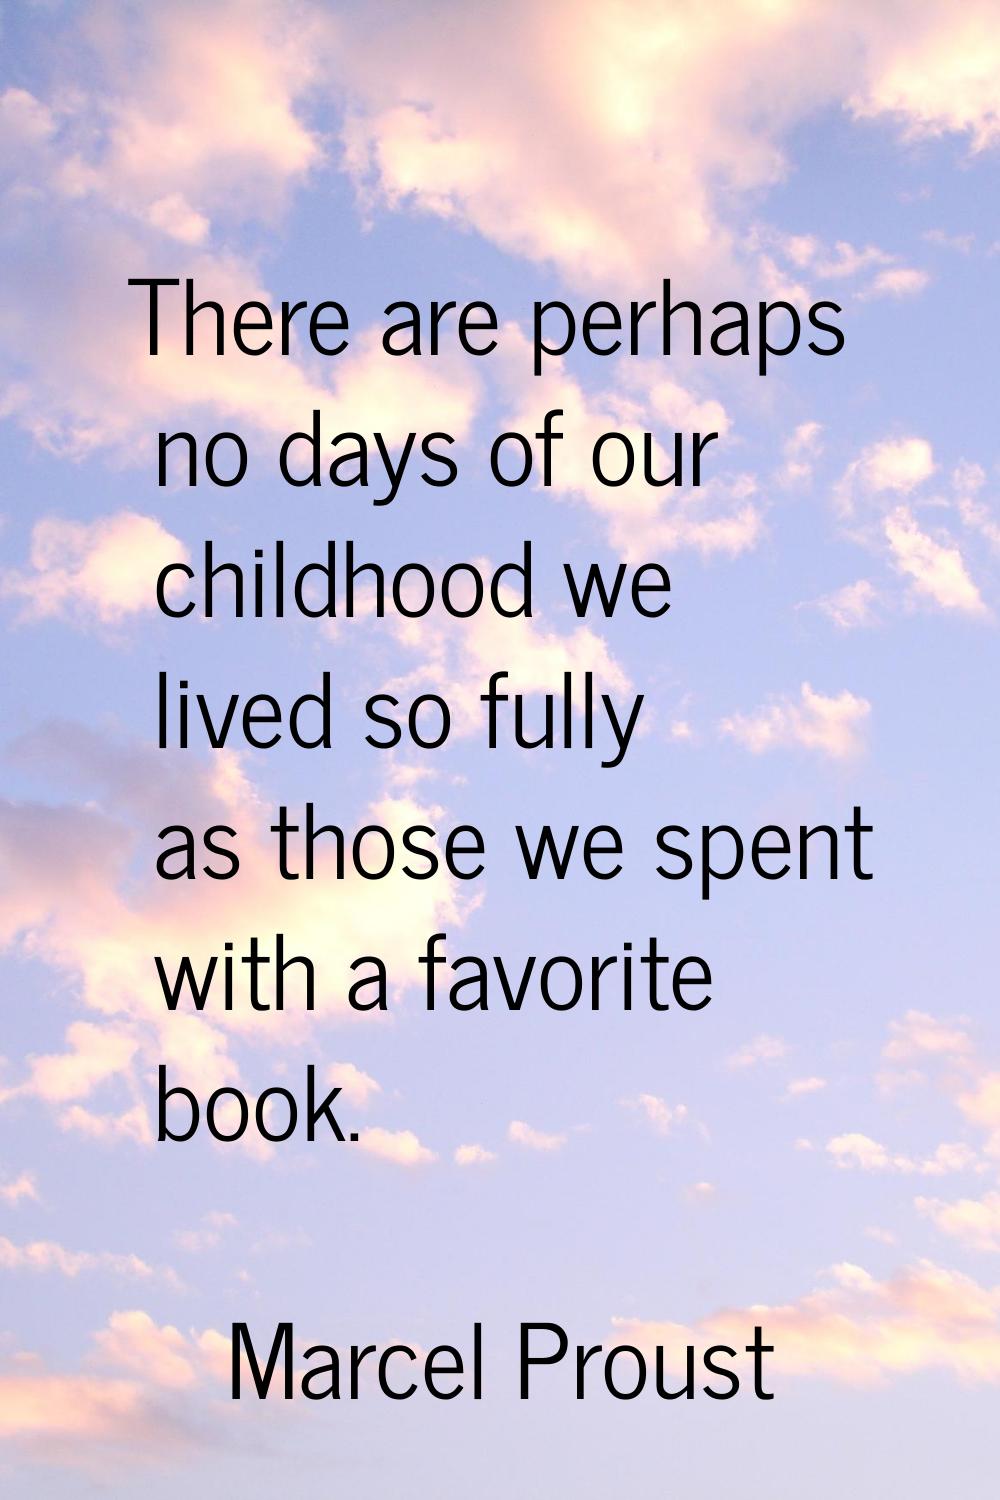 There are perhaps no days of our childhood we lived so fully as those we spent with a favorite book